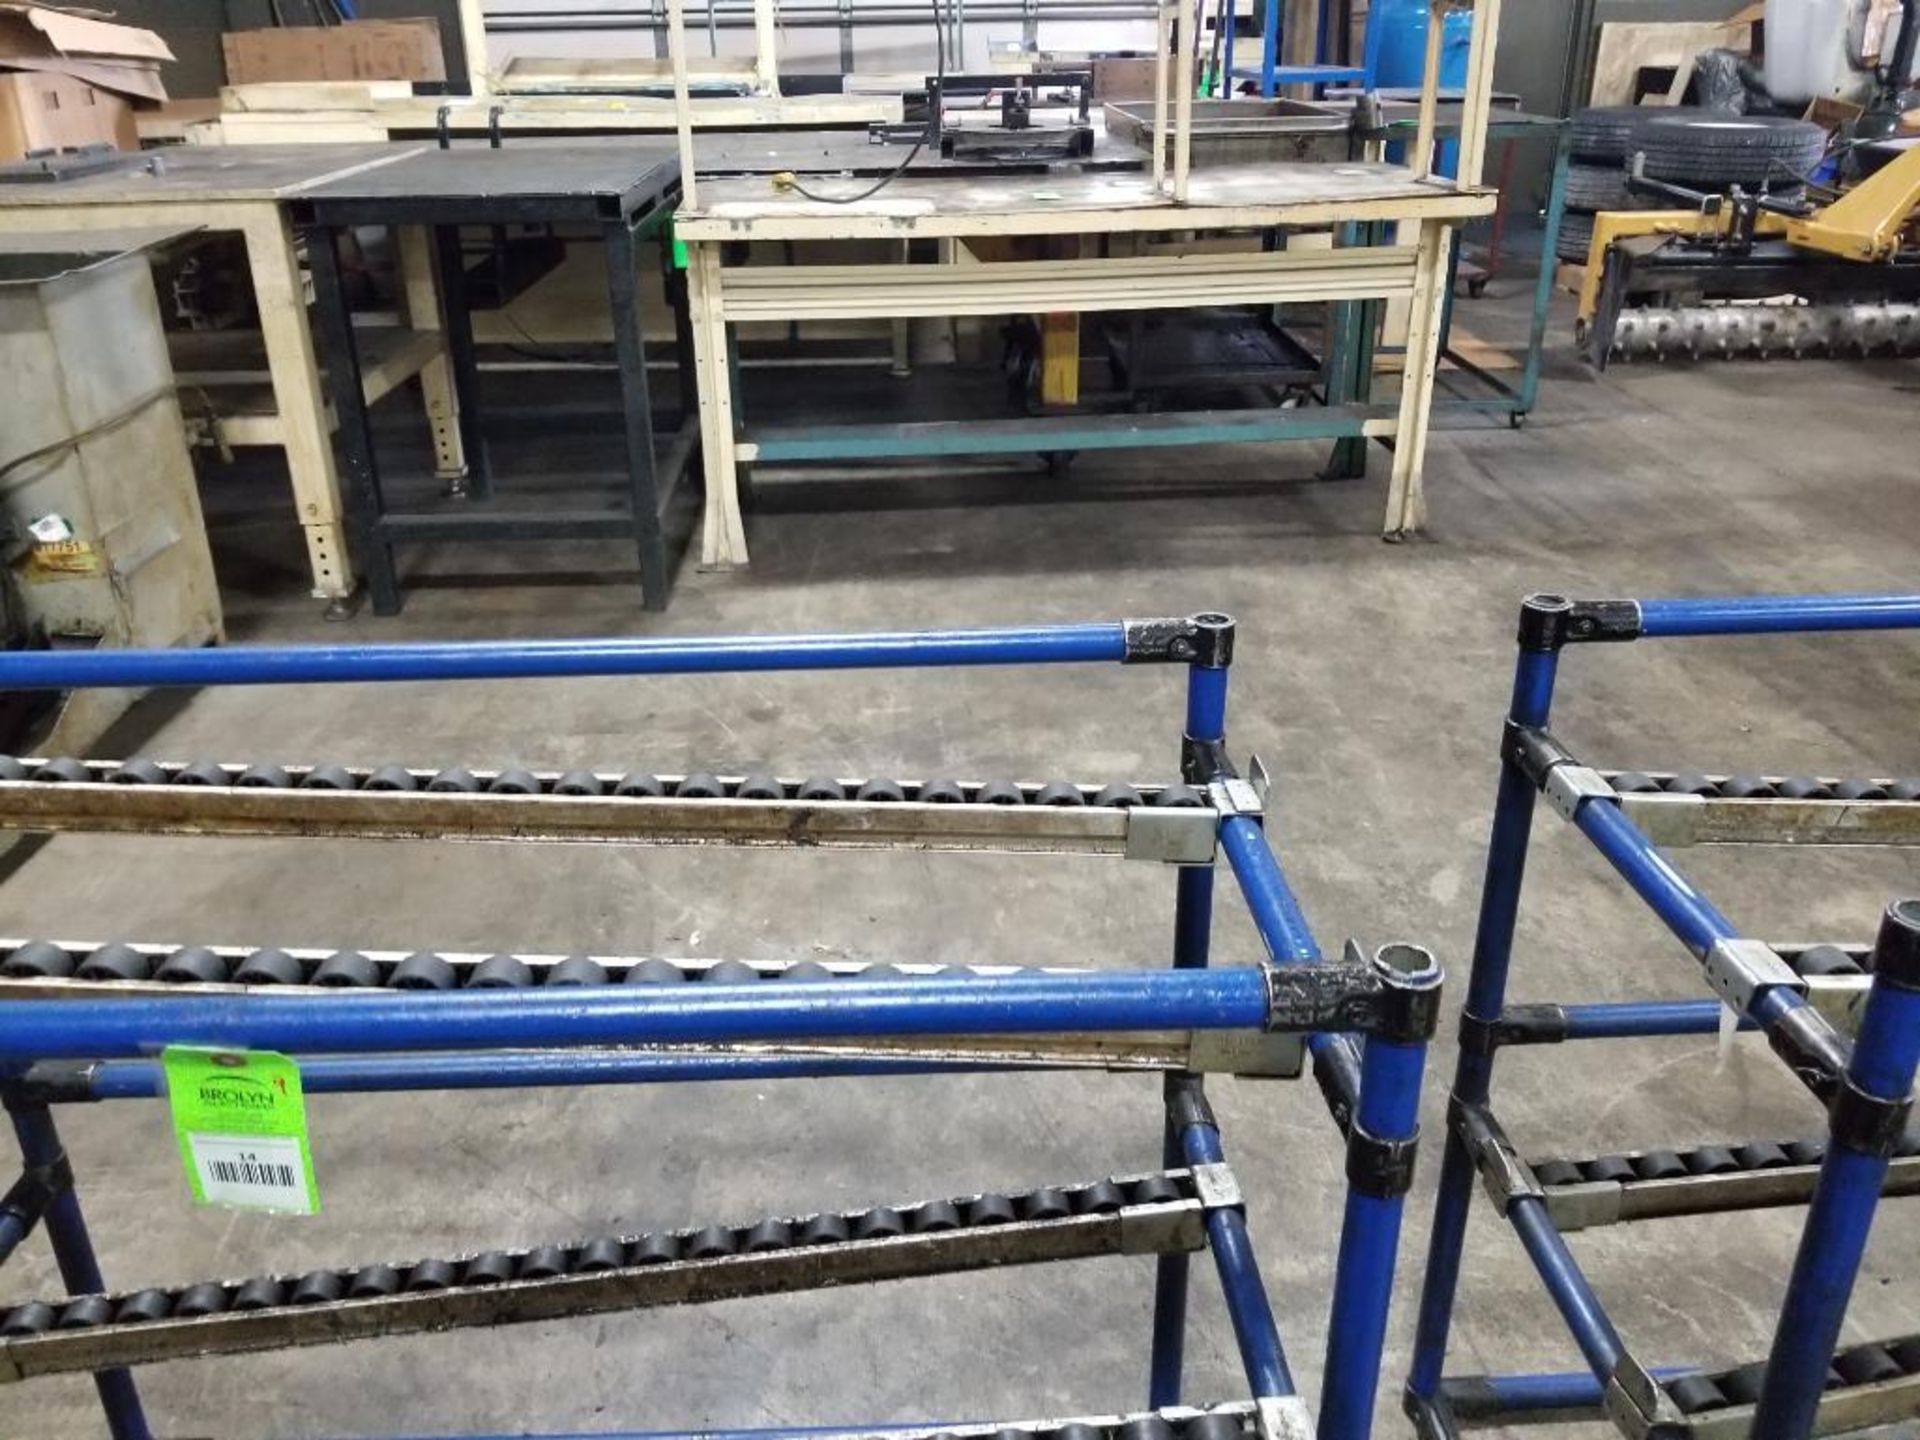 Qty 2 - Two-level roller racks. 39x19x33 each. LxWxH. - Image 3 of 11